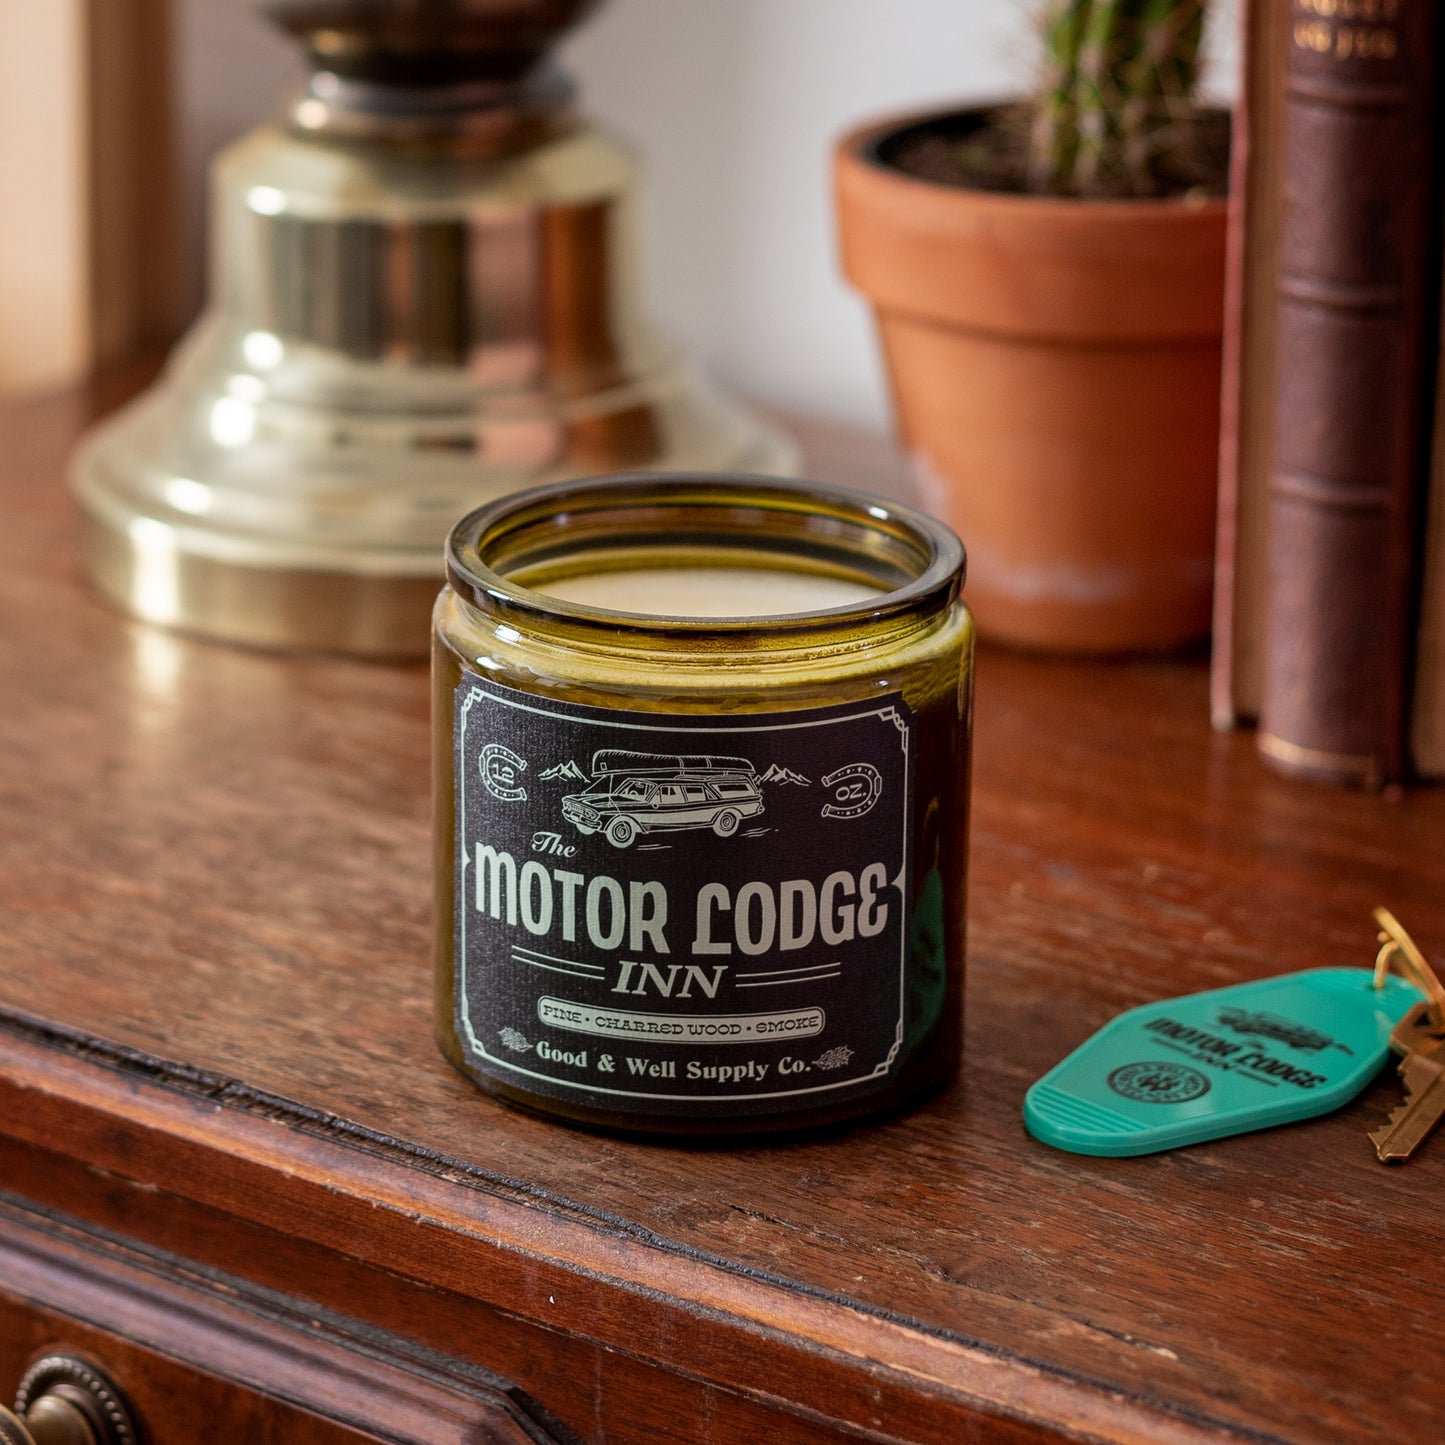 Rusty Spur Motor Lodge Candle - 70% Off